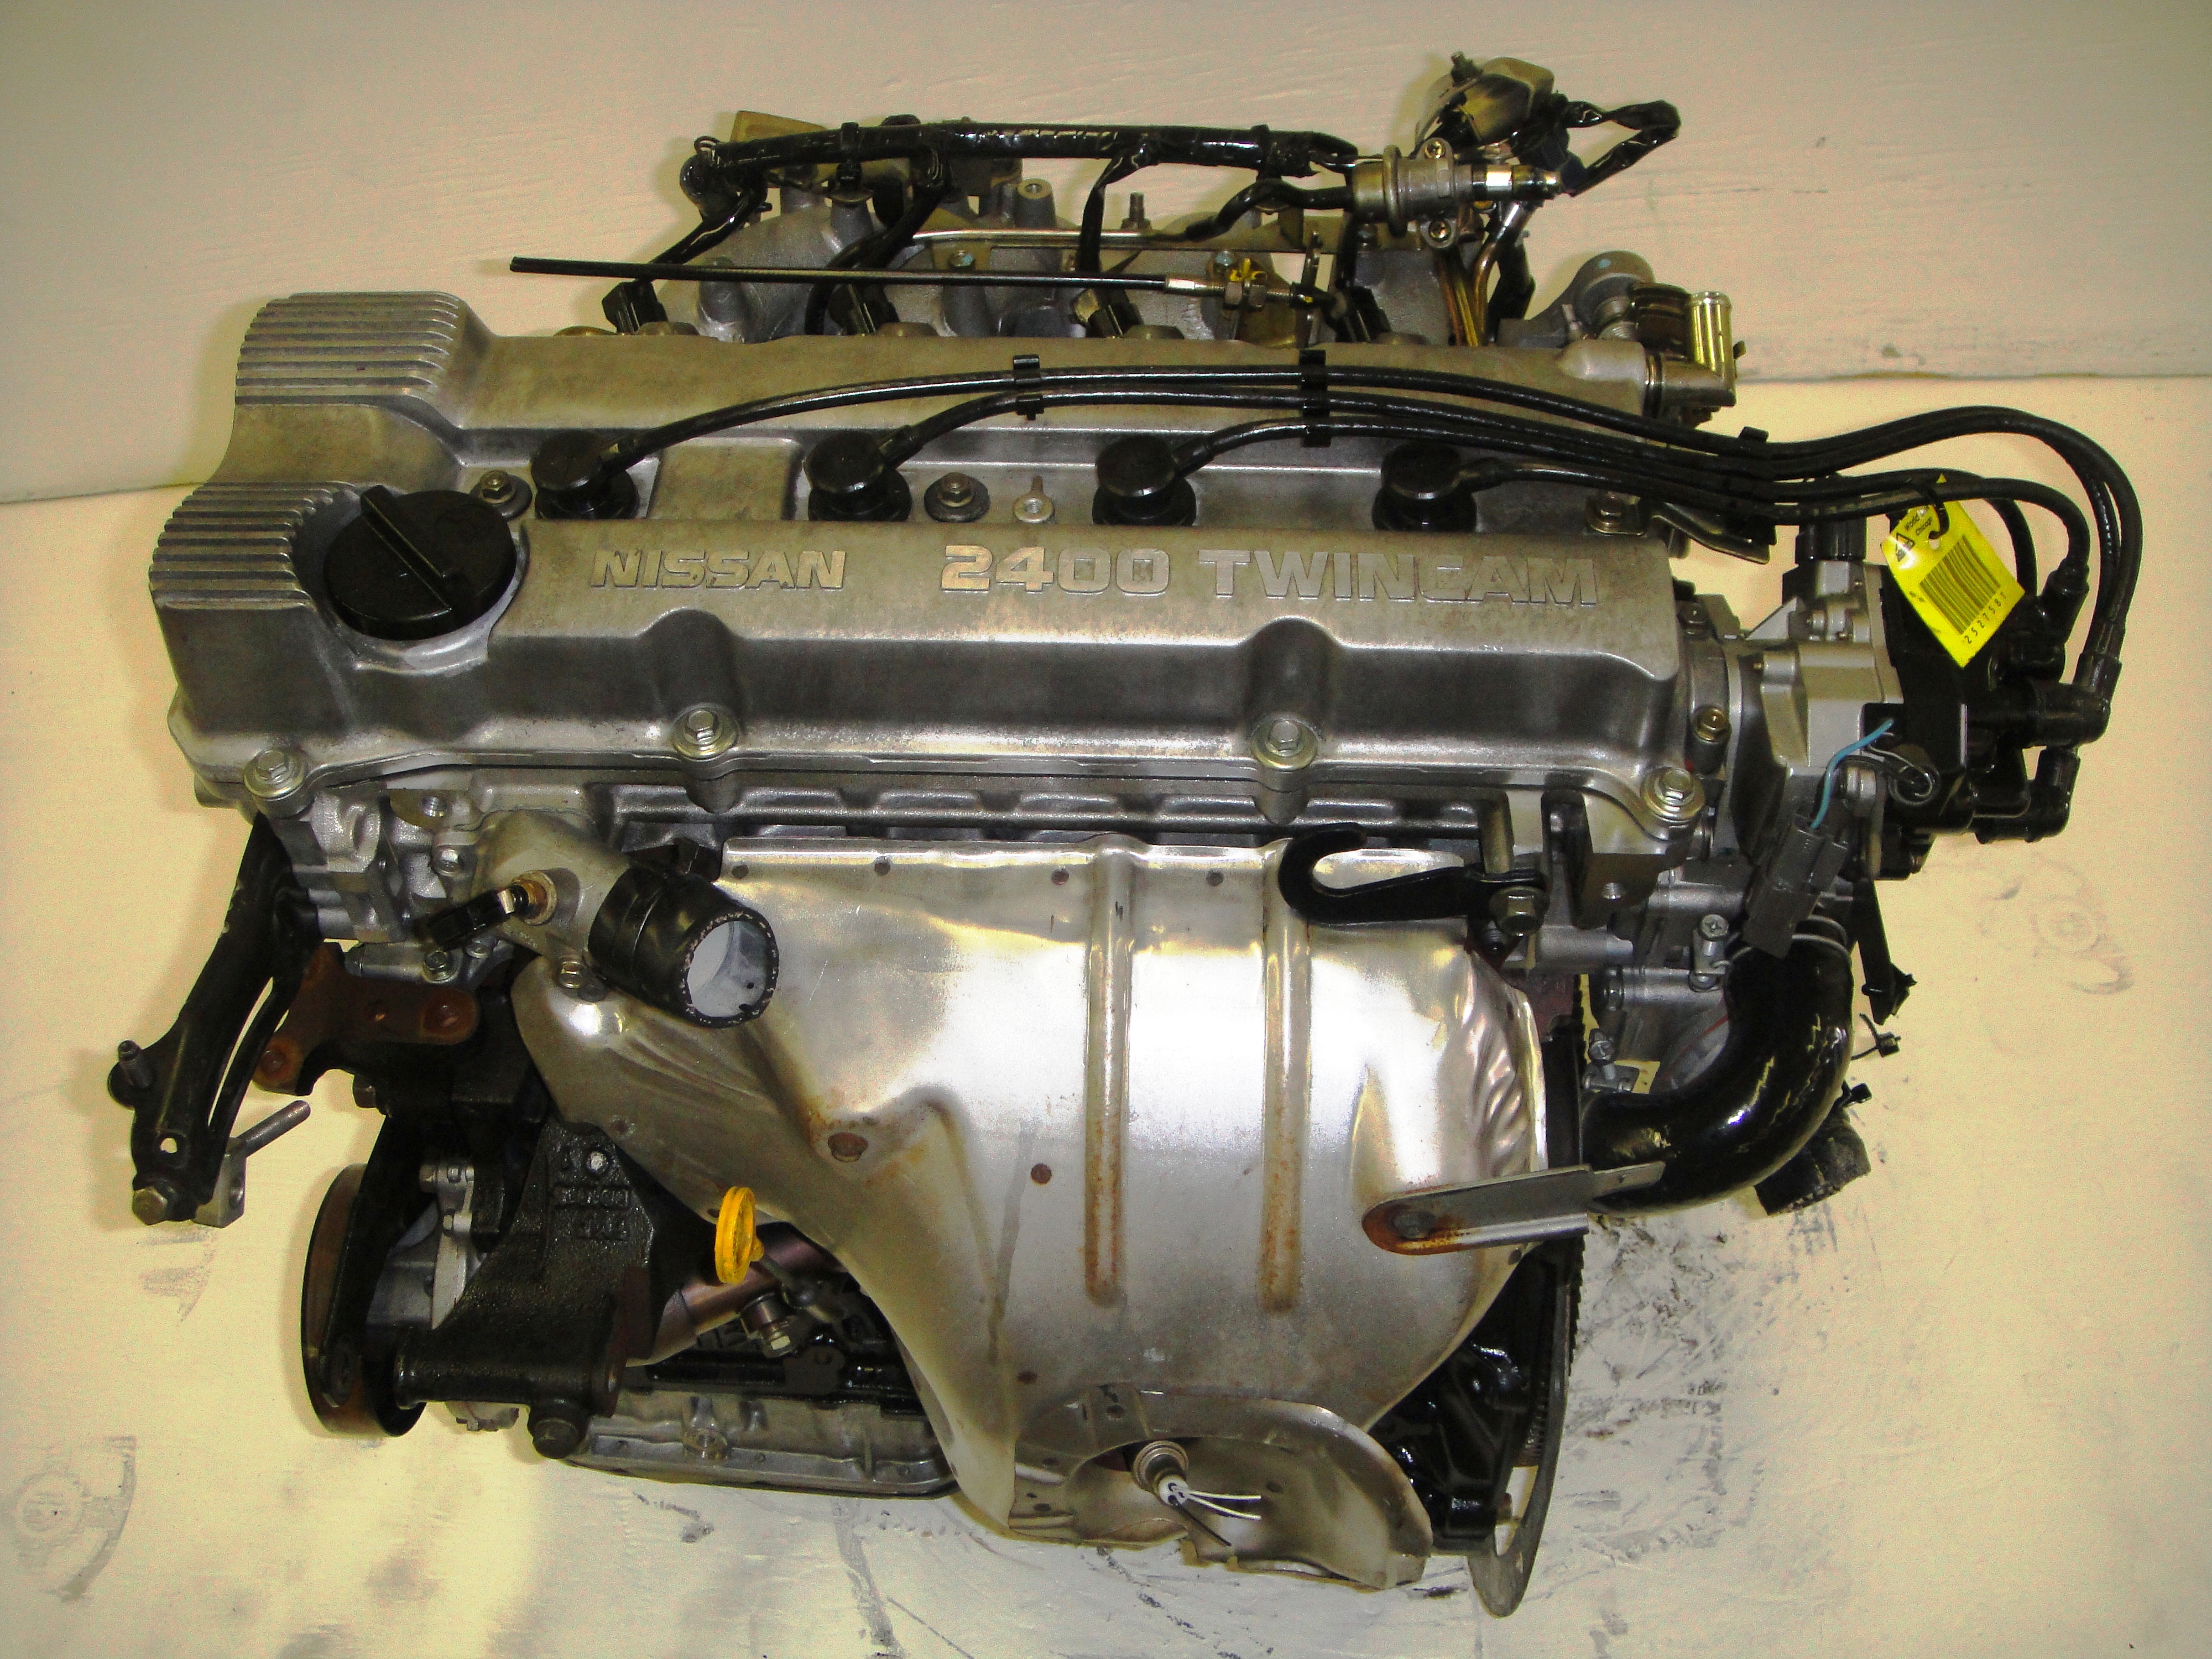 1993 Nissan altima gxe engine #10